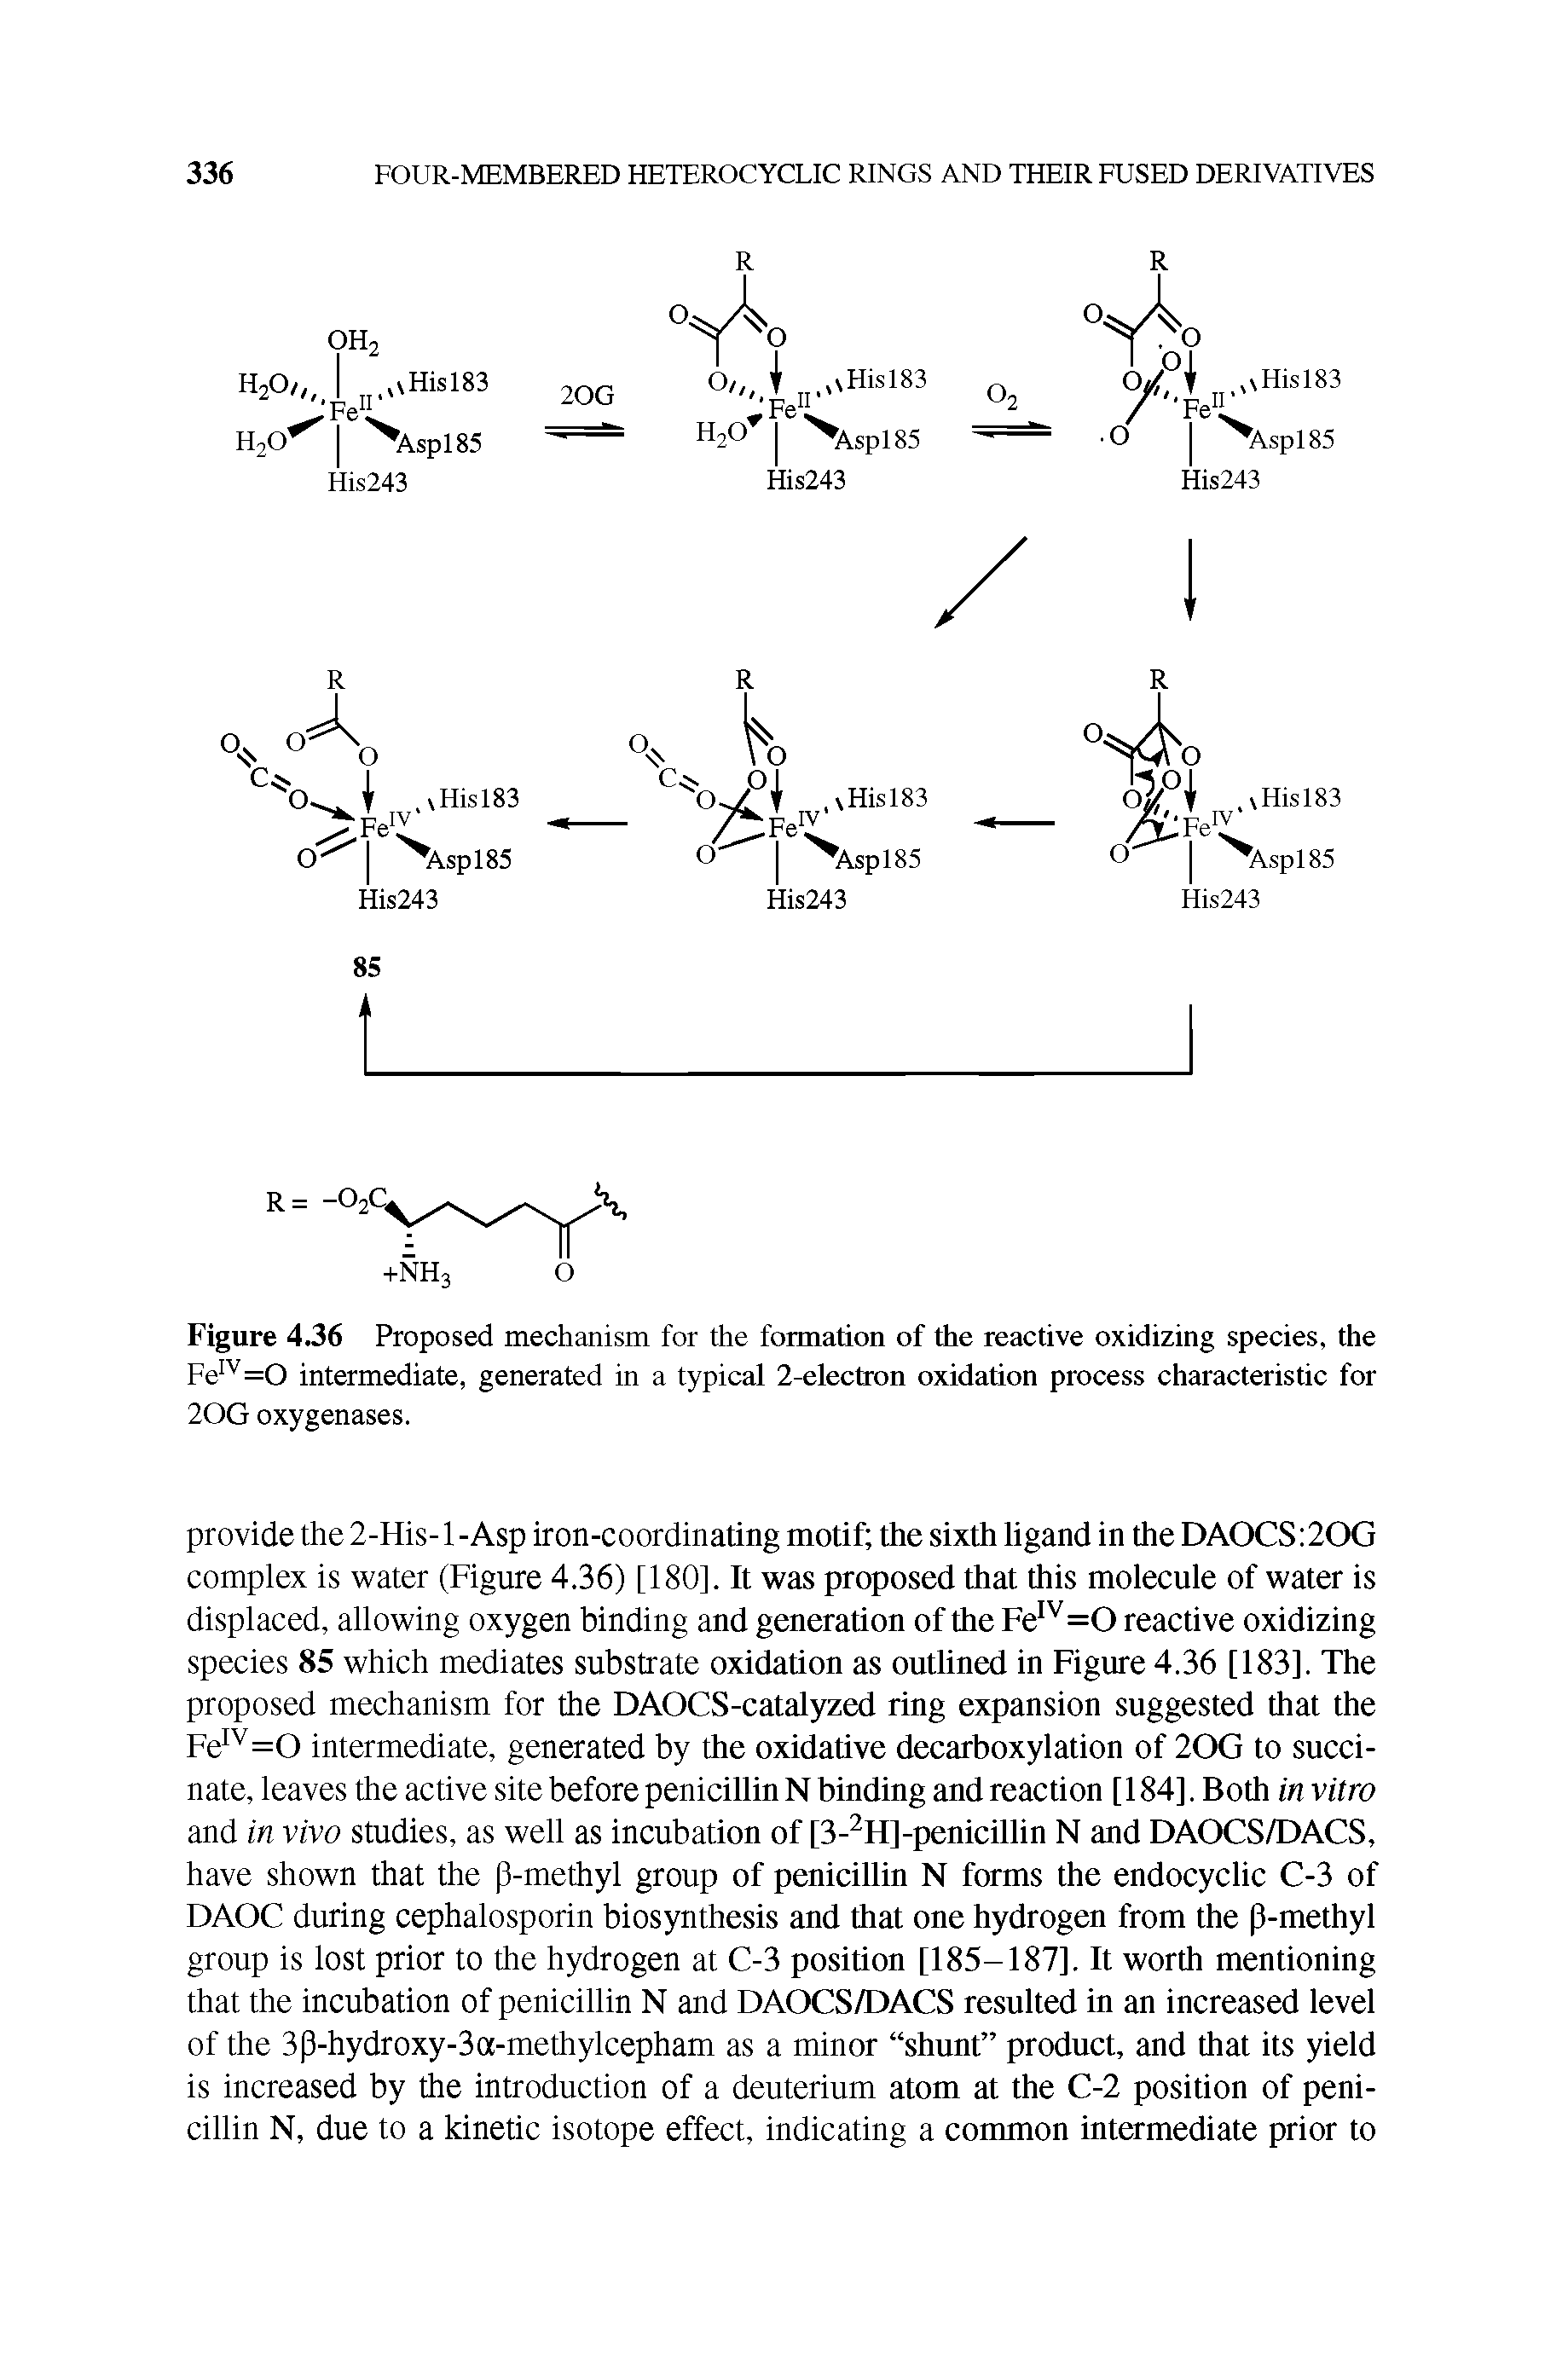 Figure 4.36 Proposed mechanism for the formation of the reactive oxidizing species, the Fe v=o intermediate, generated in a typical 2-electron oxidation process characteristic for 20G oxygenases.